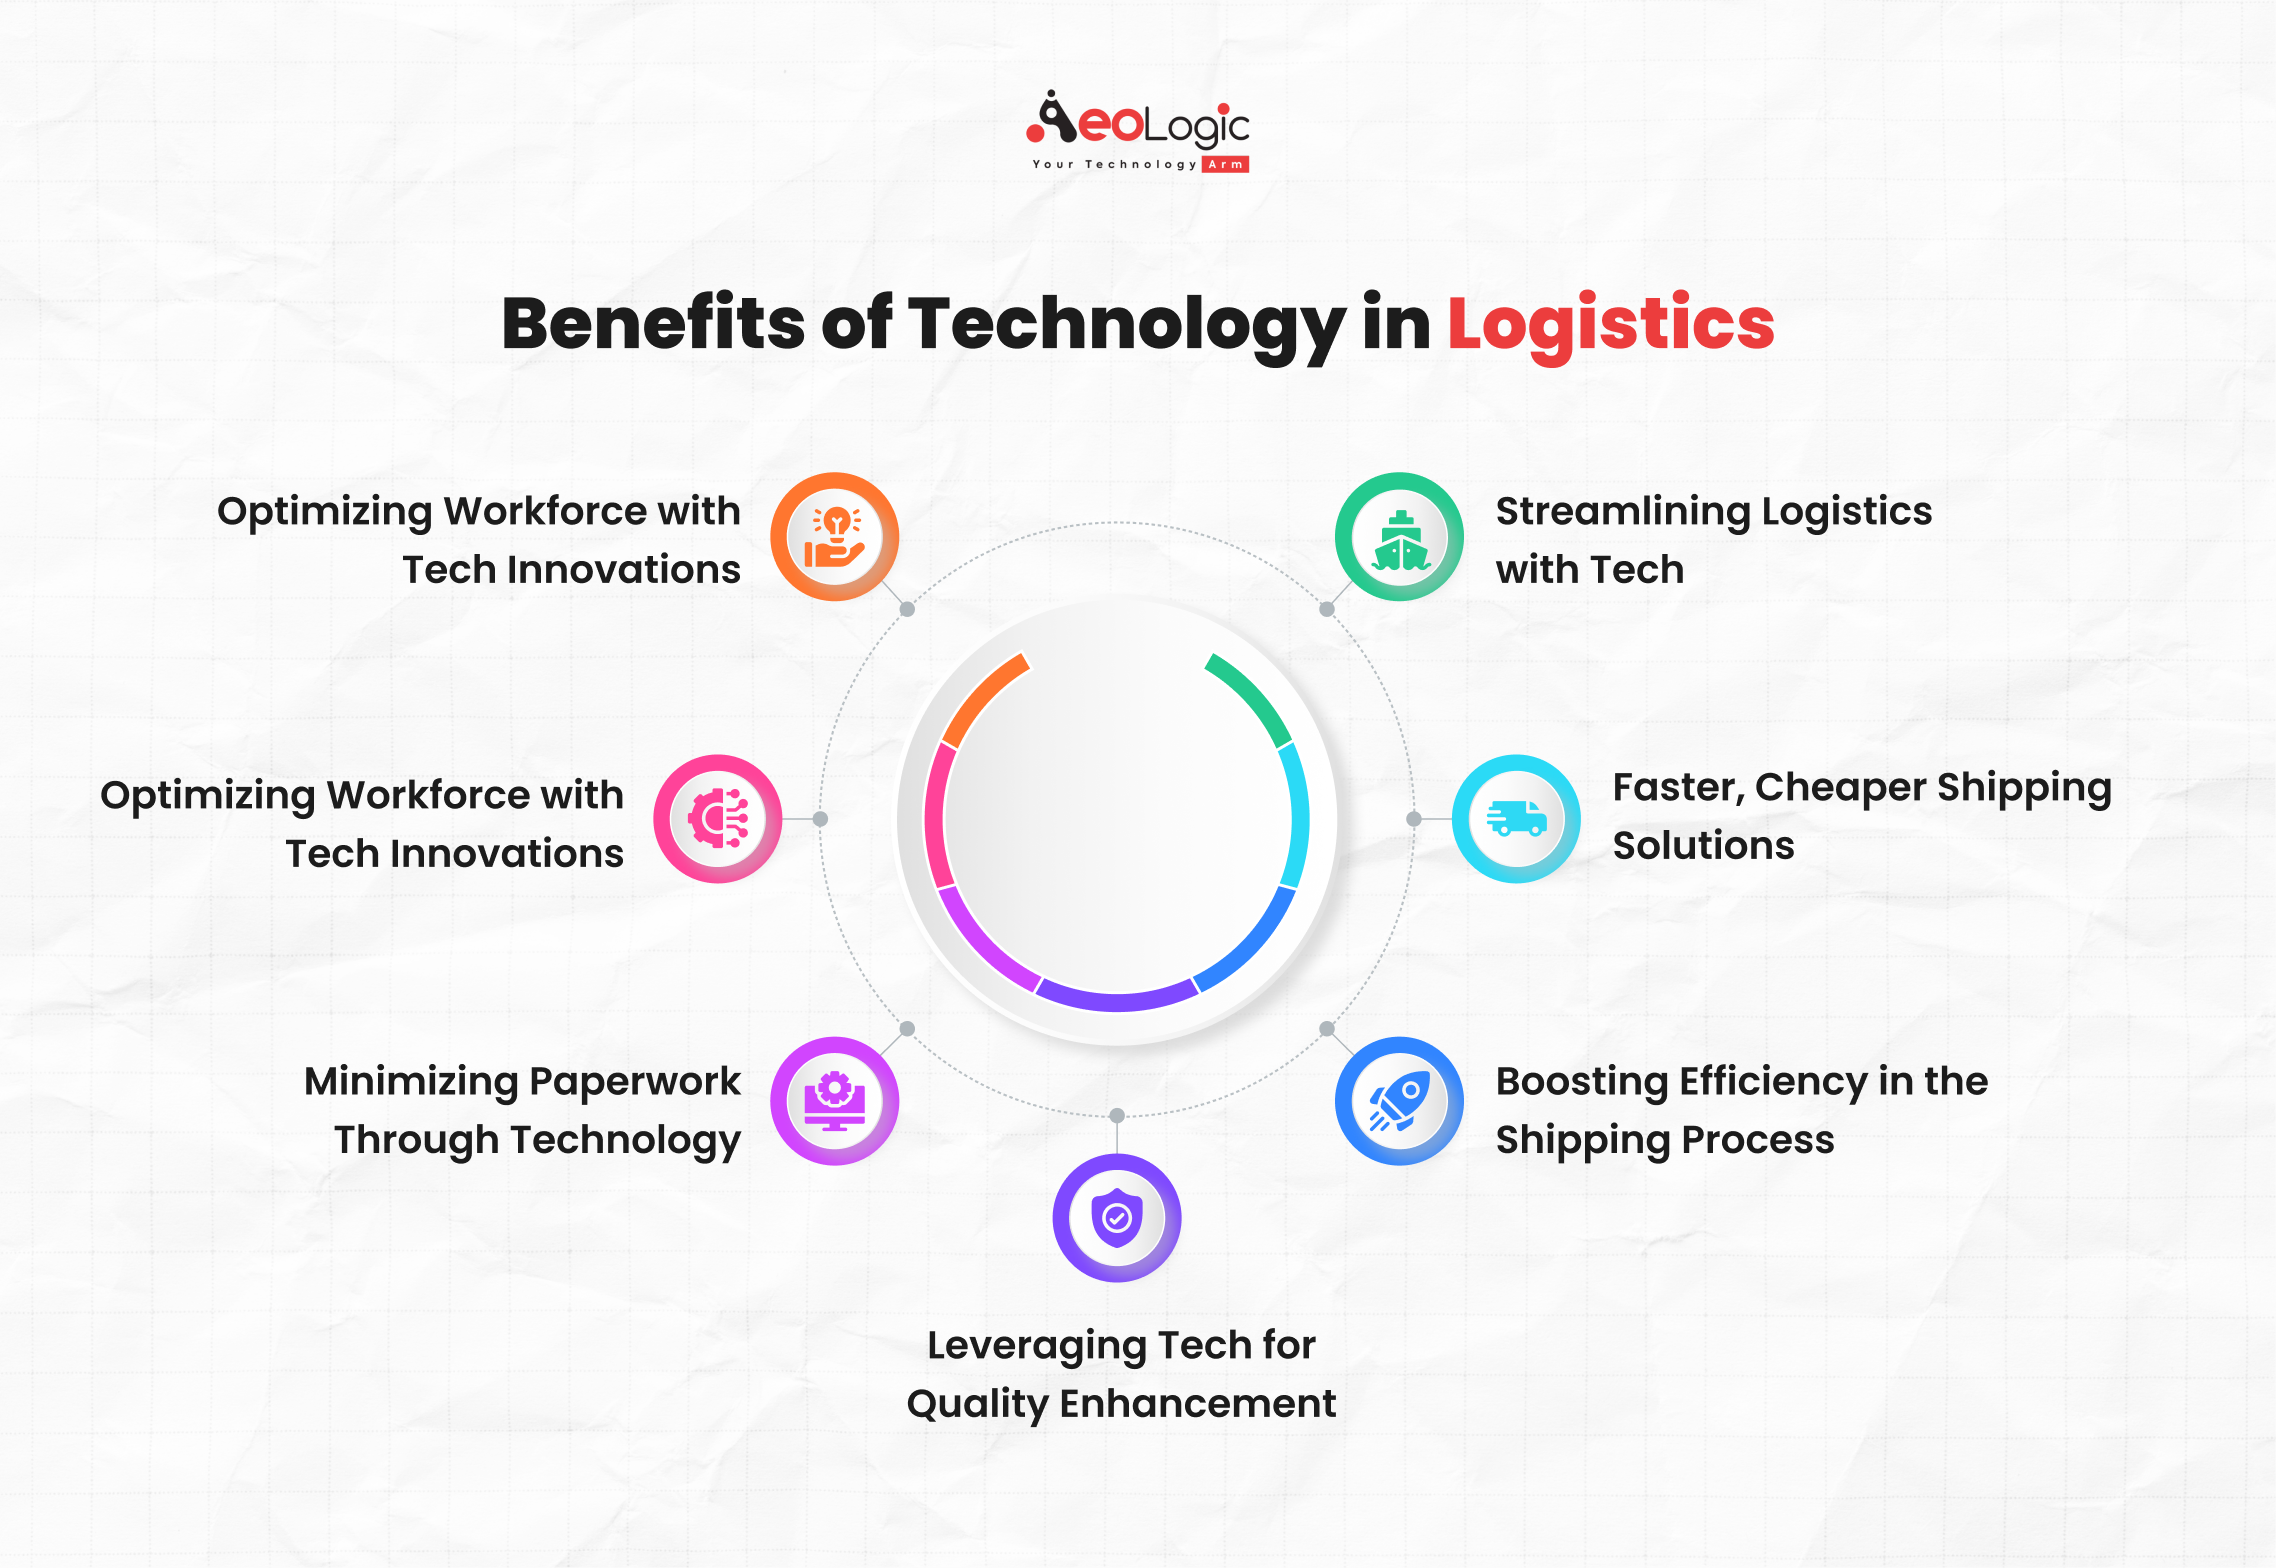 Benefits of Technology in Logistics